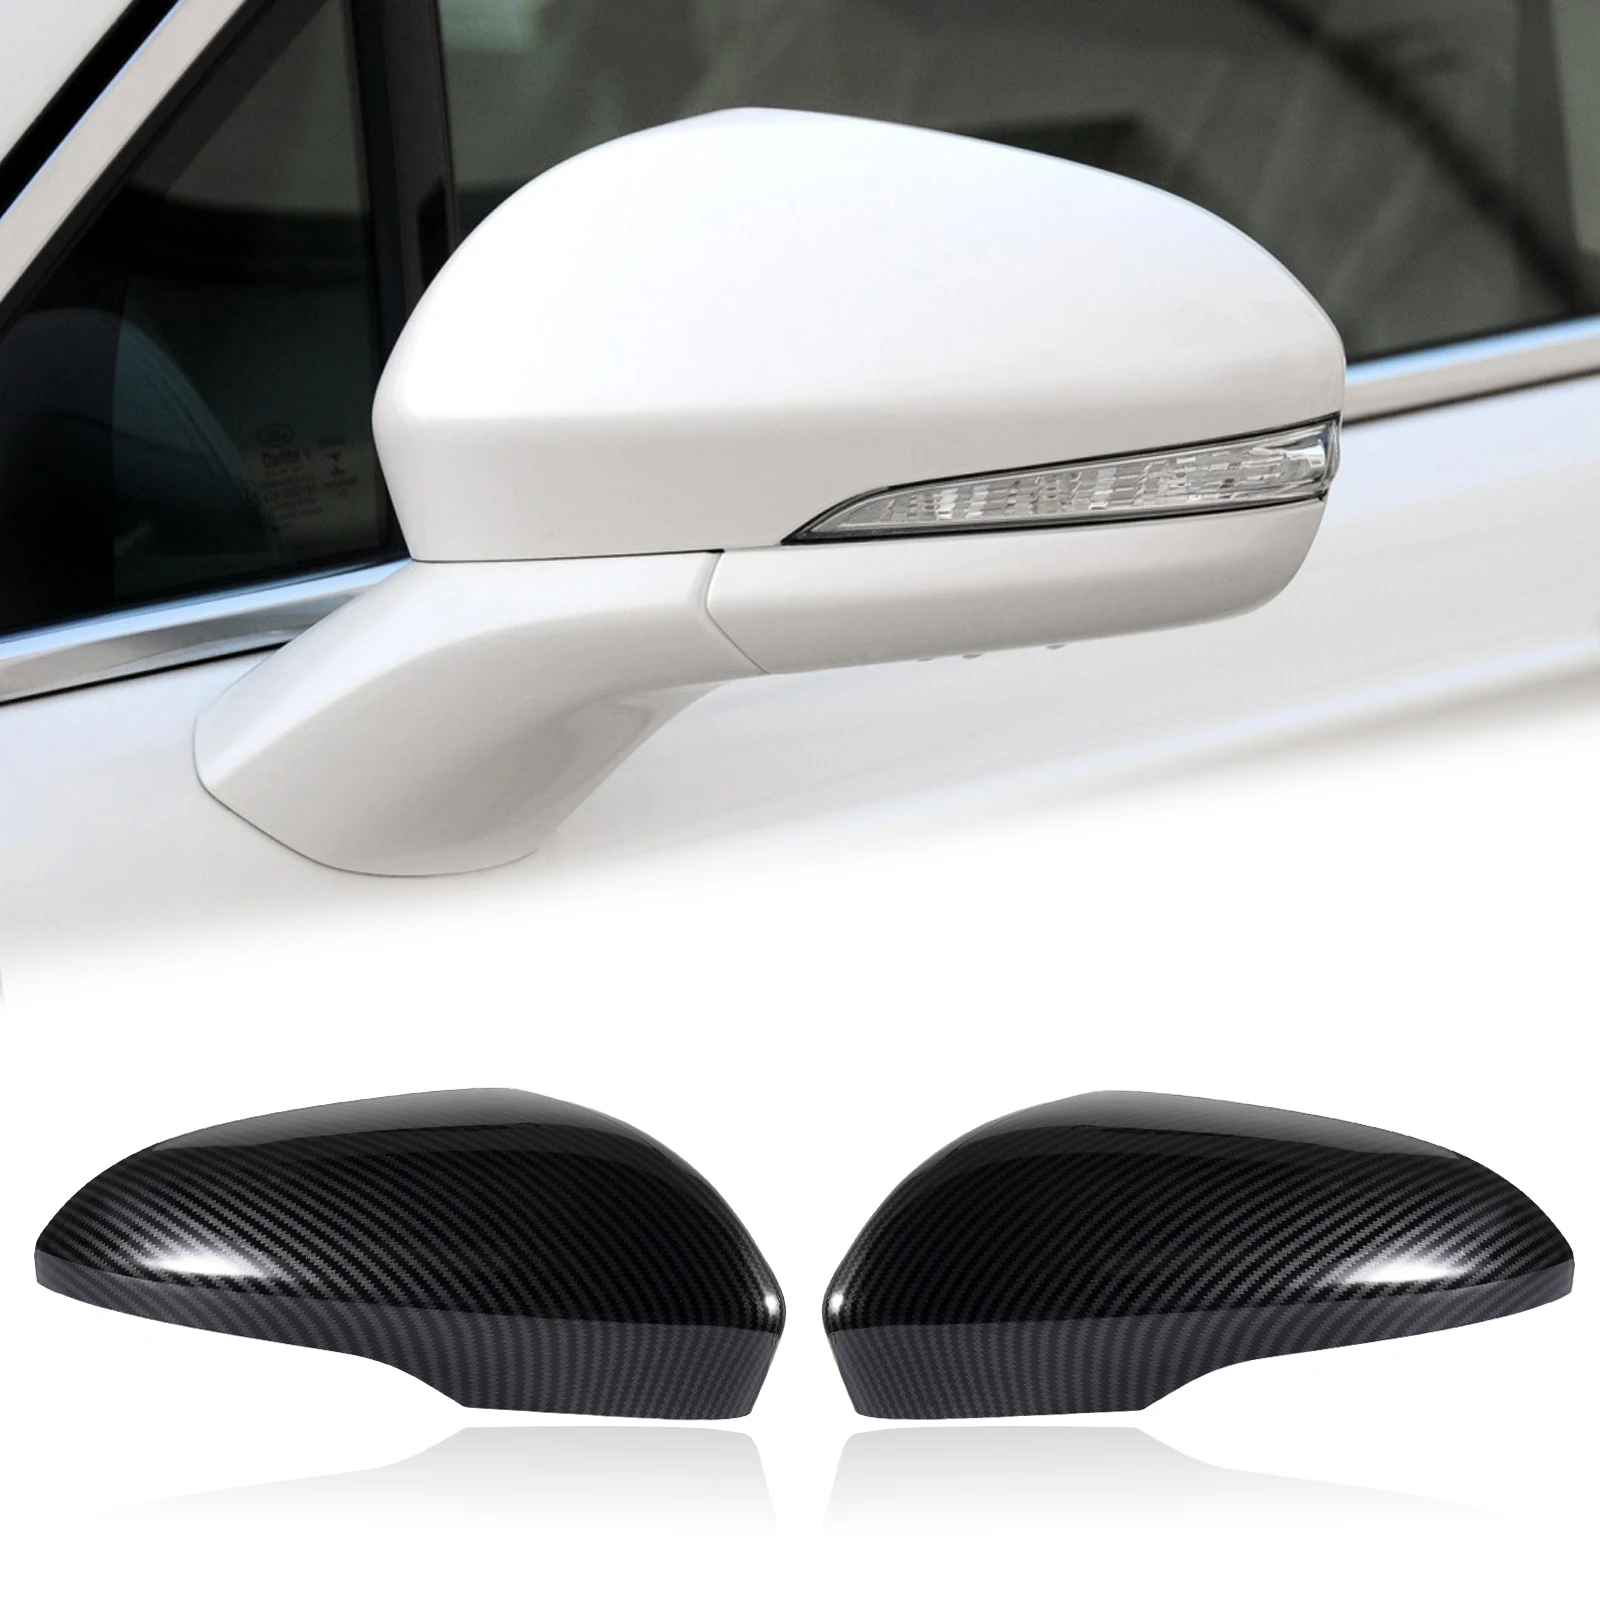  fiber pattern door rearview mirror cover cap housing fit for 2013 2018 ford fusion car thumb200